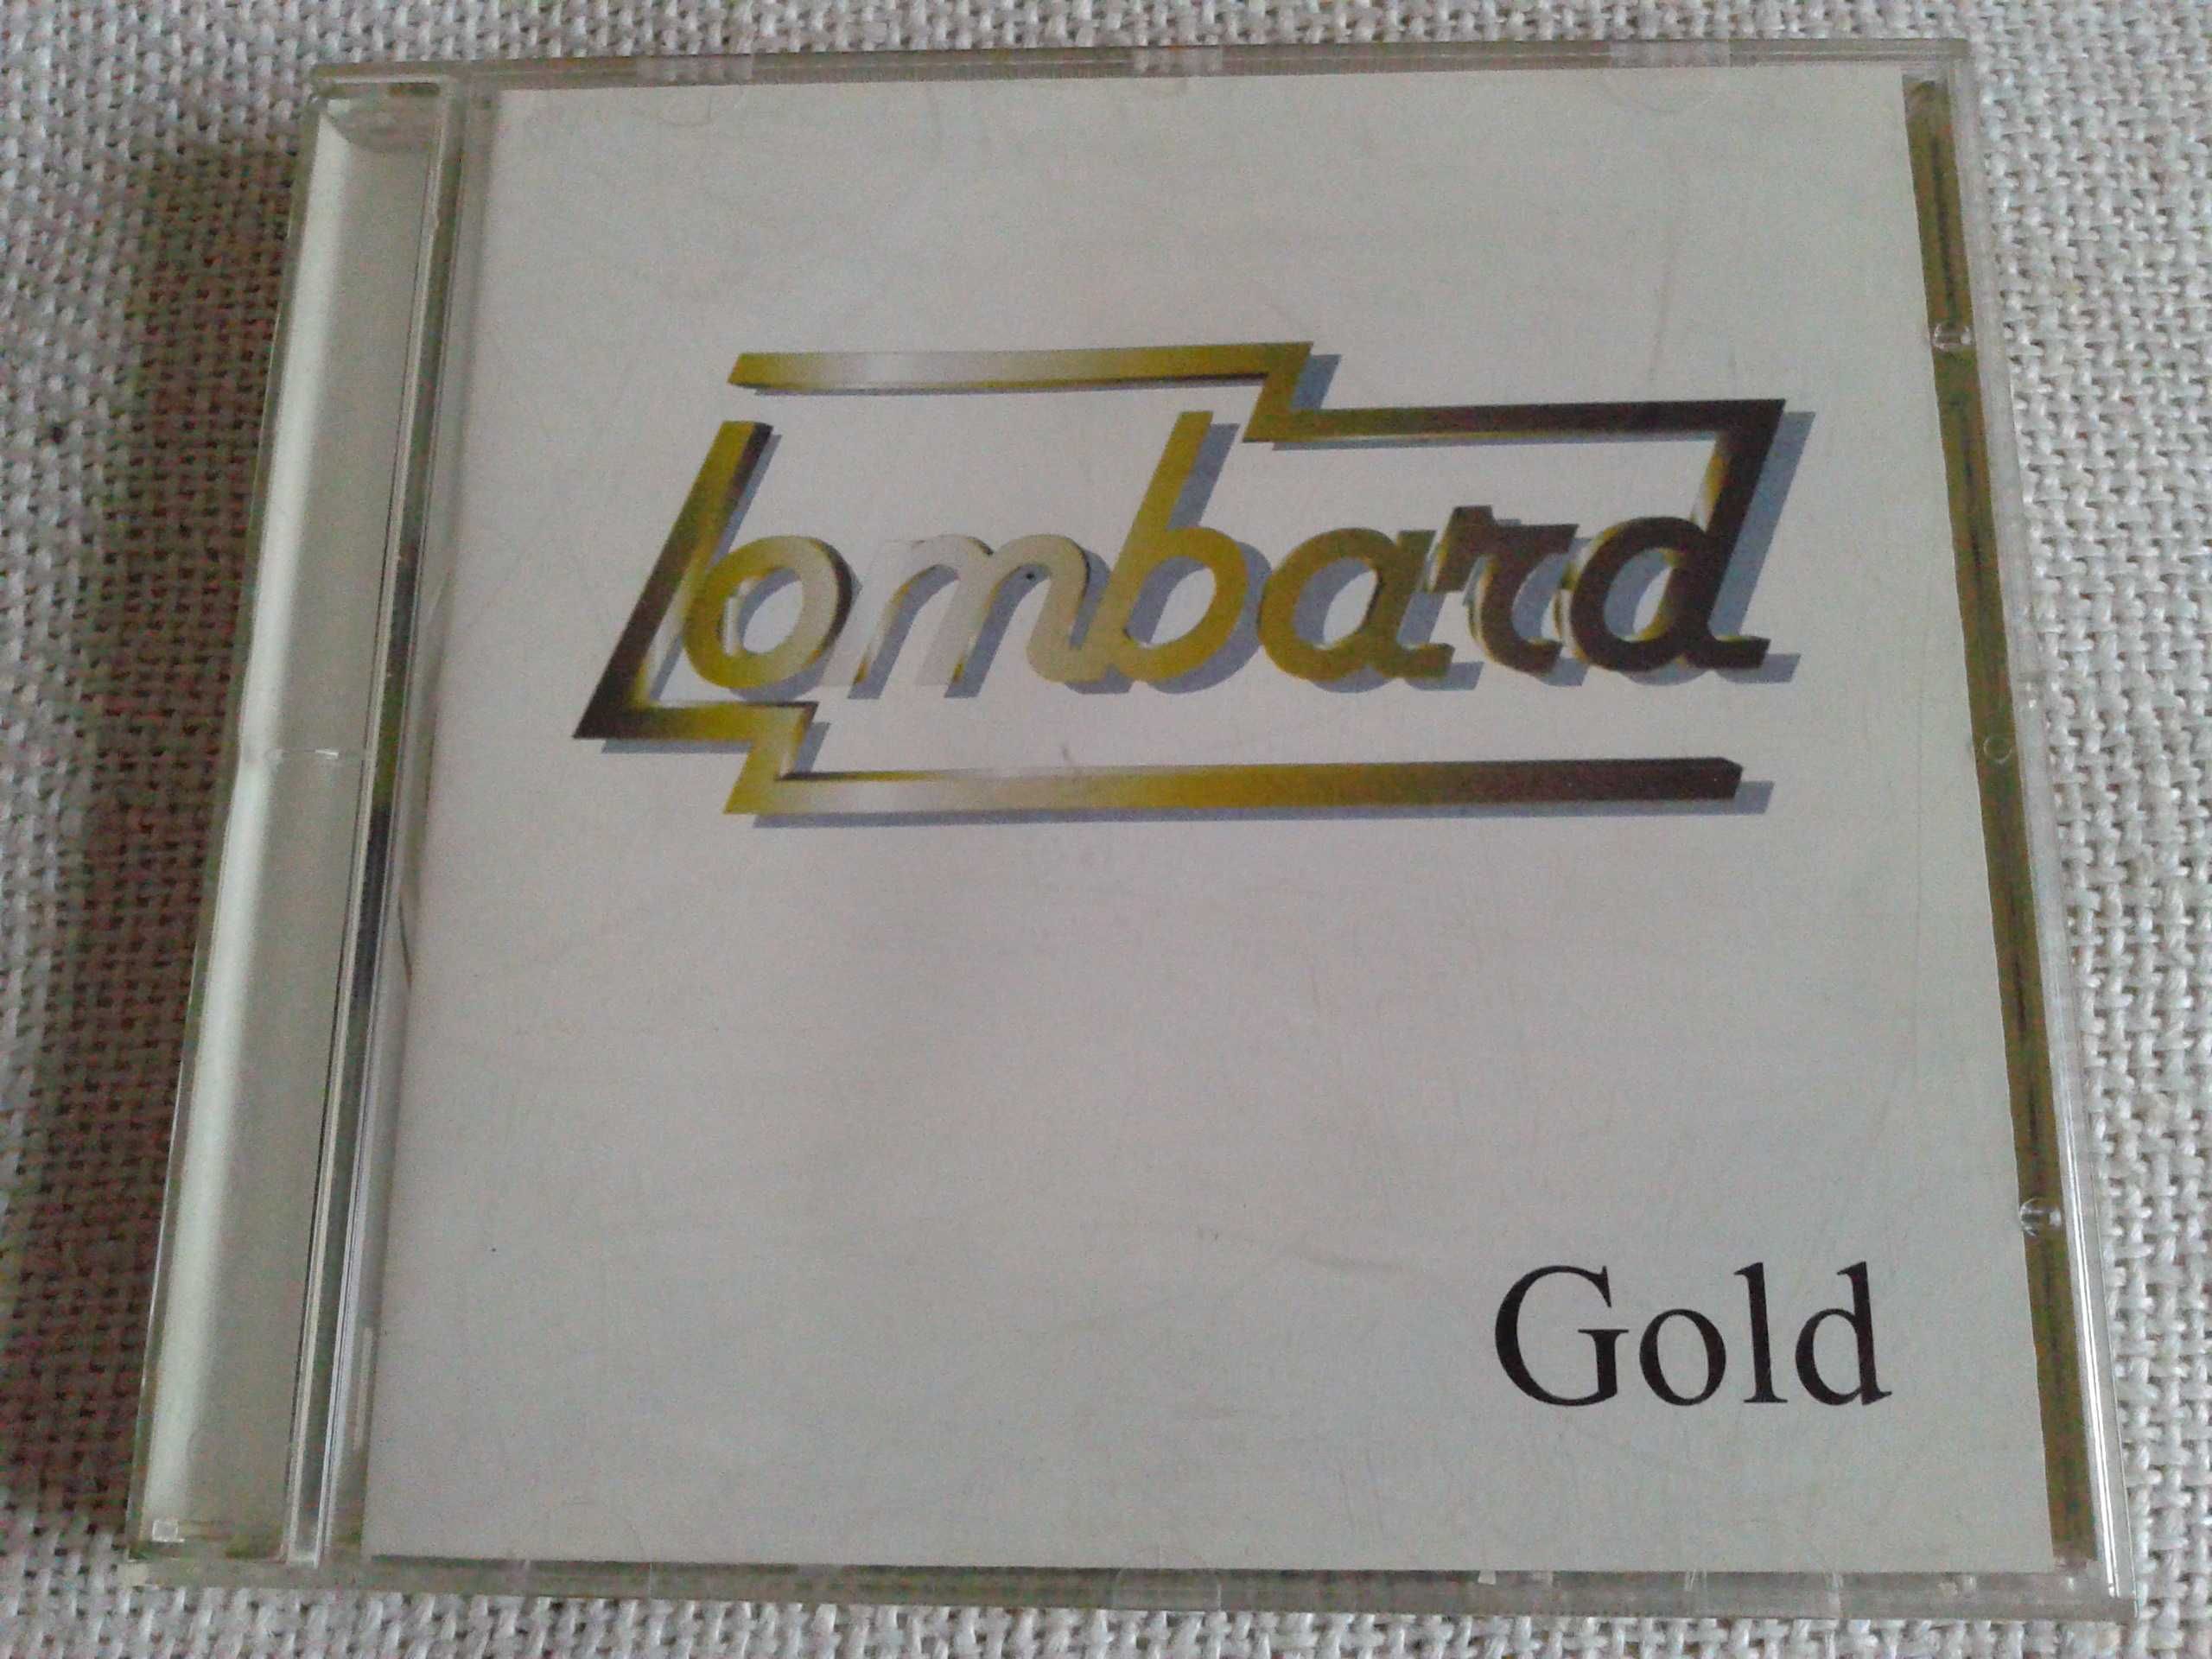 Lombard - Gold  CD